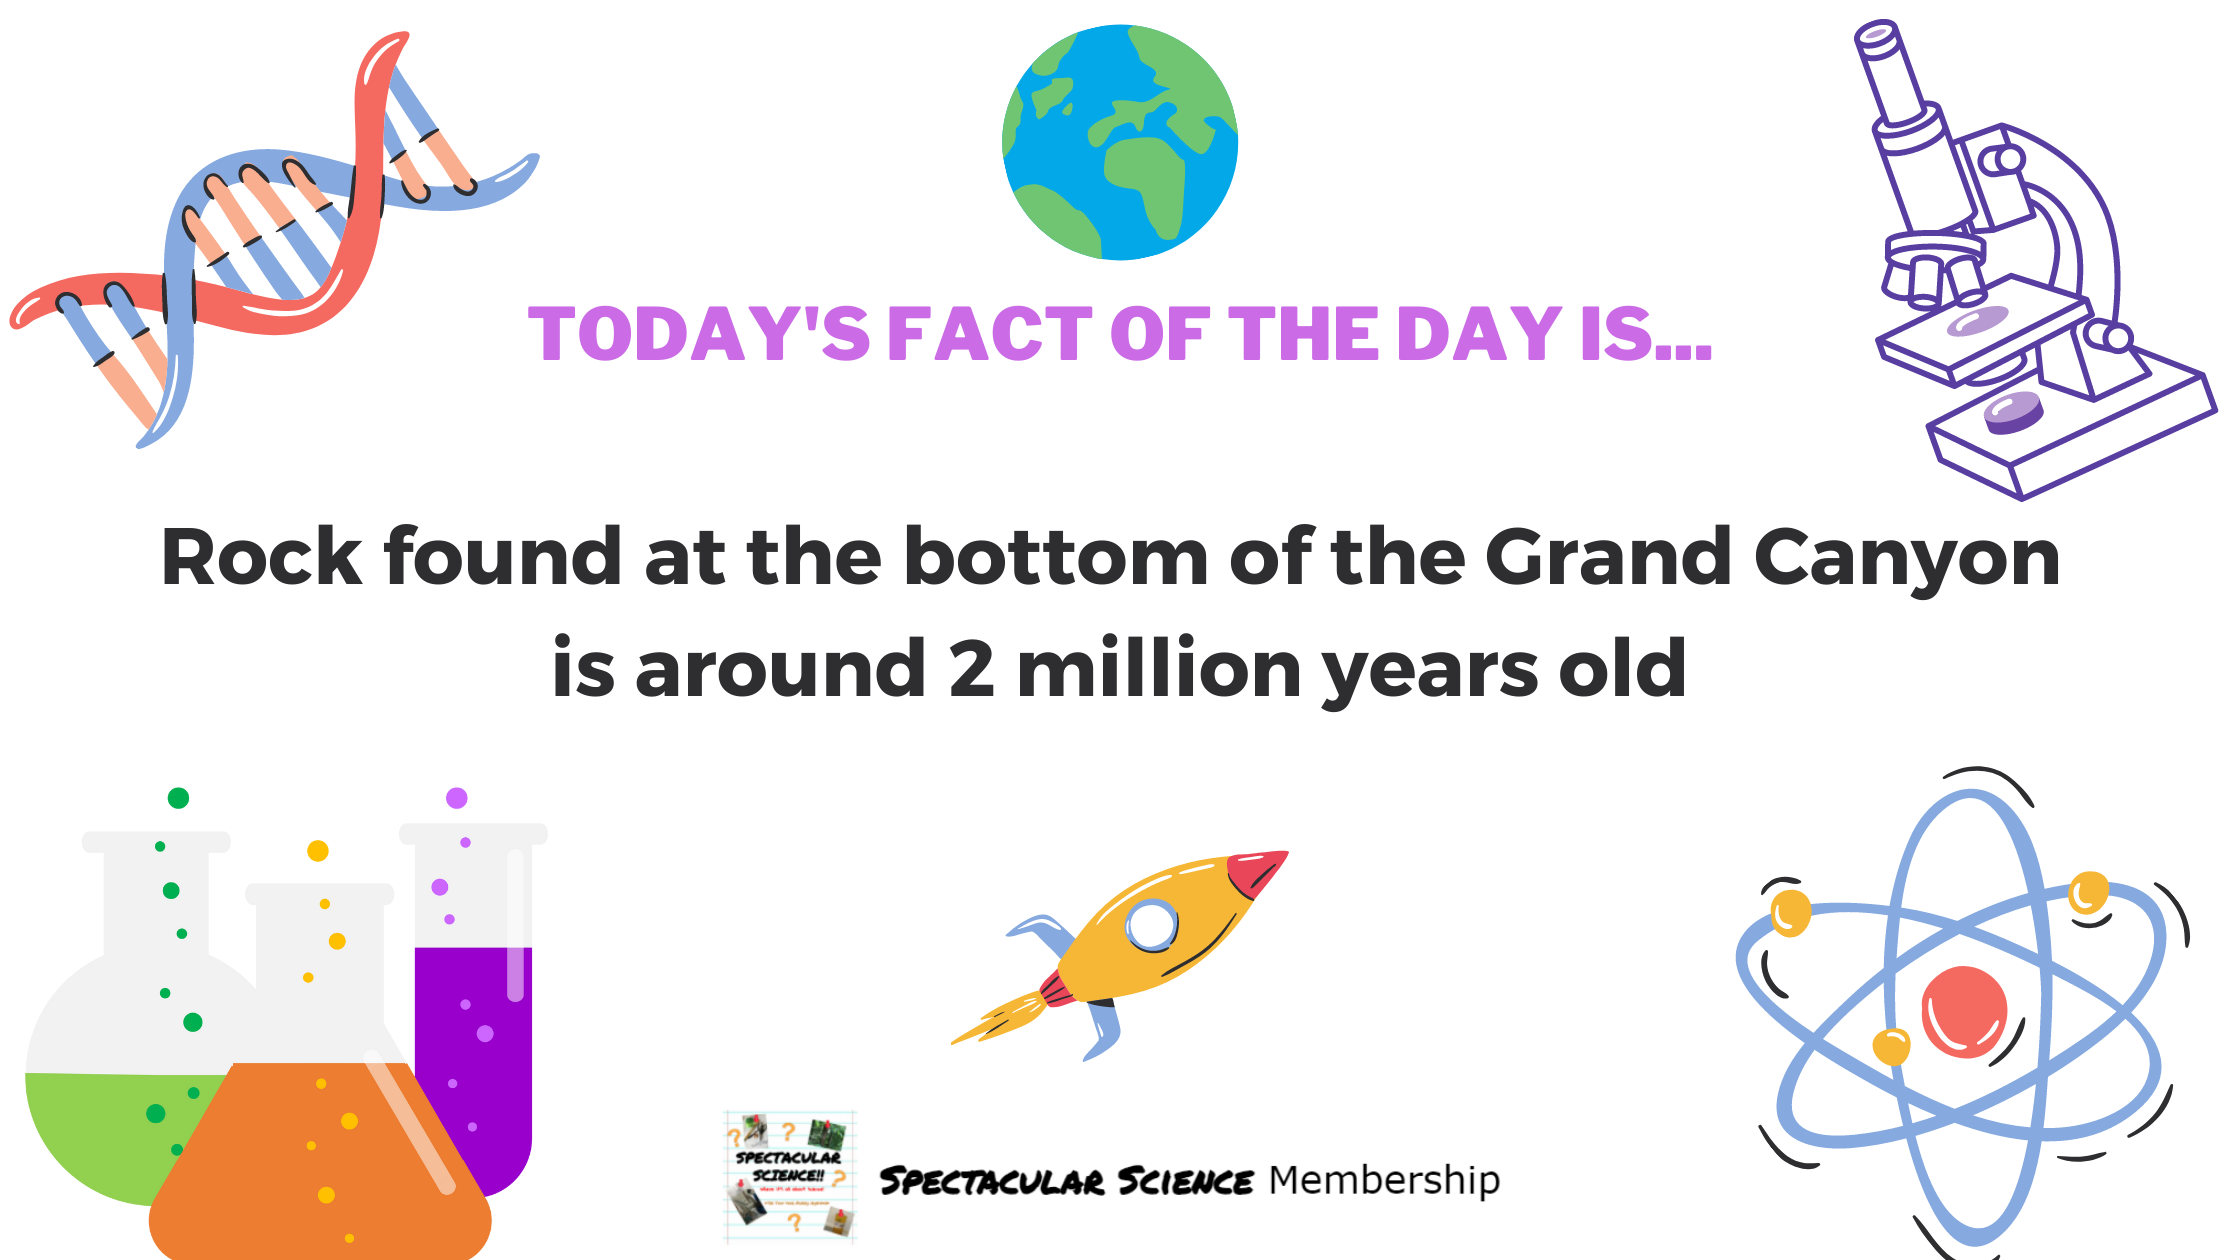 Fact of the Day Image Feb. 21st